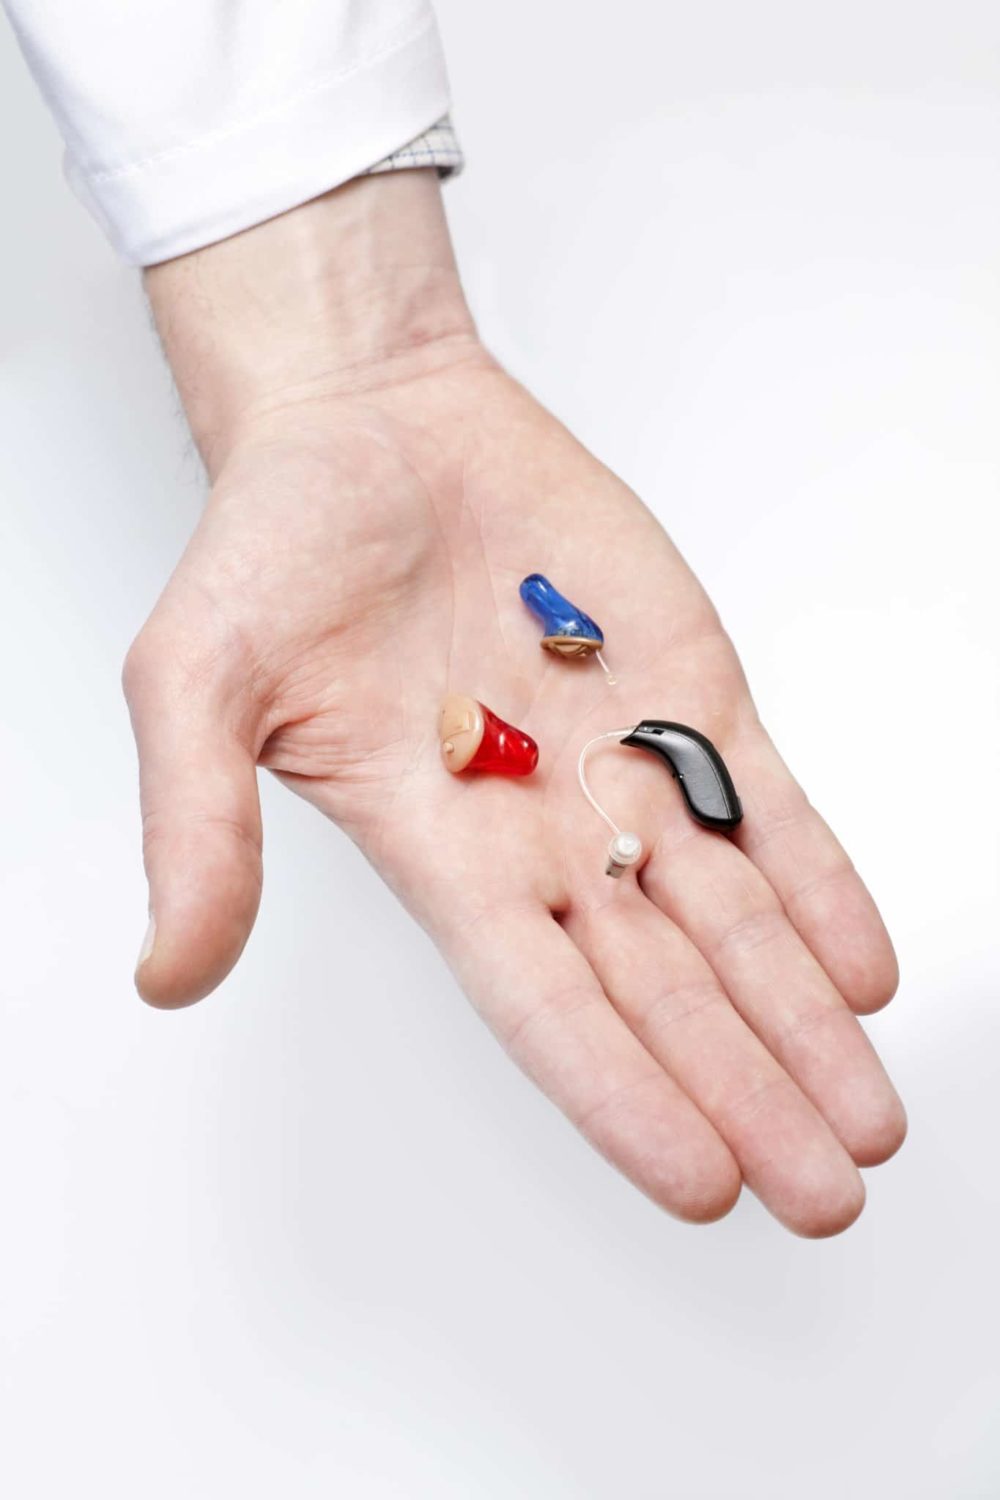 A hearing instrument specialist in Pennsylvania holding multiple hearing aids and hearing devices in their hand.